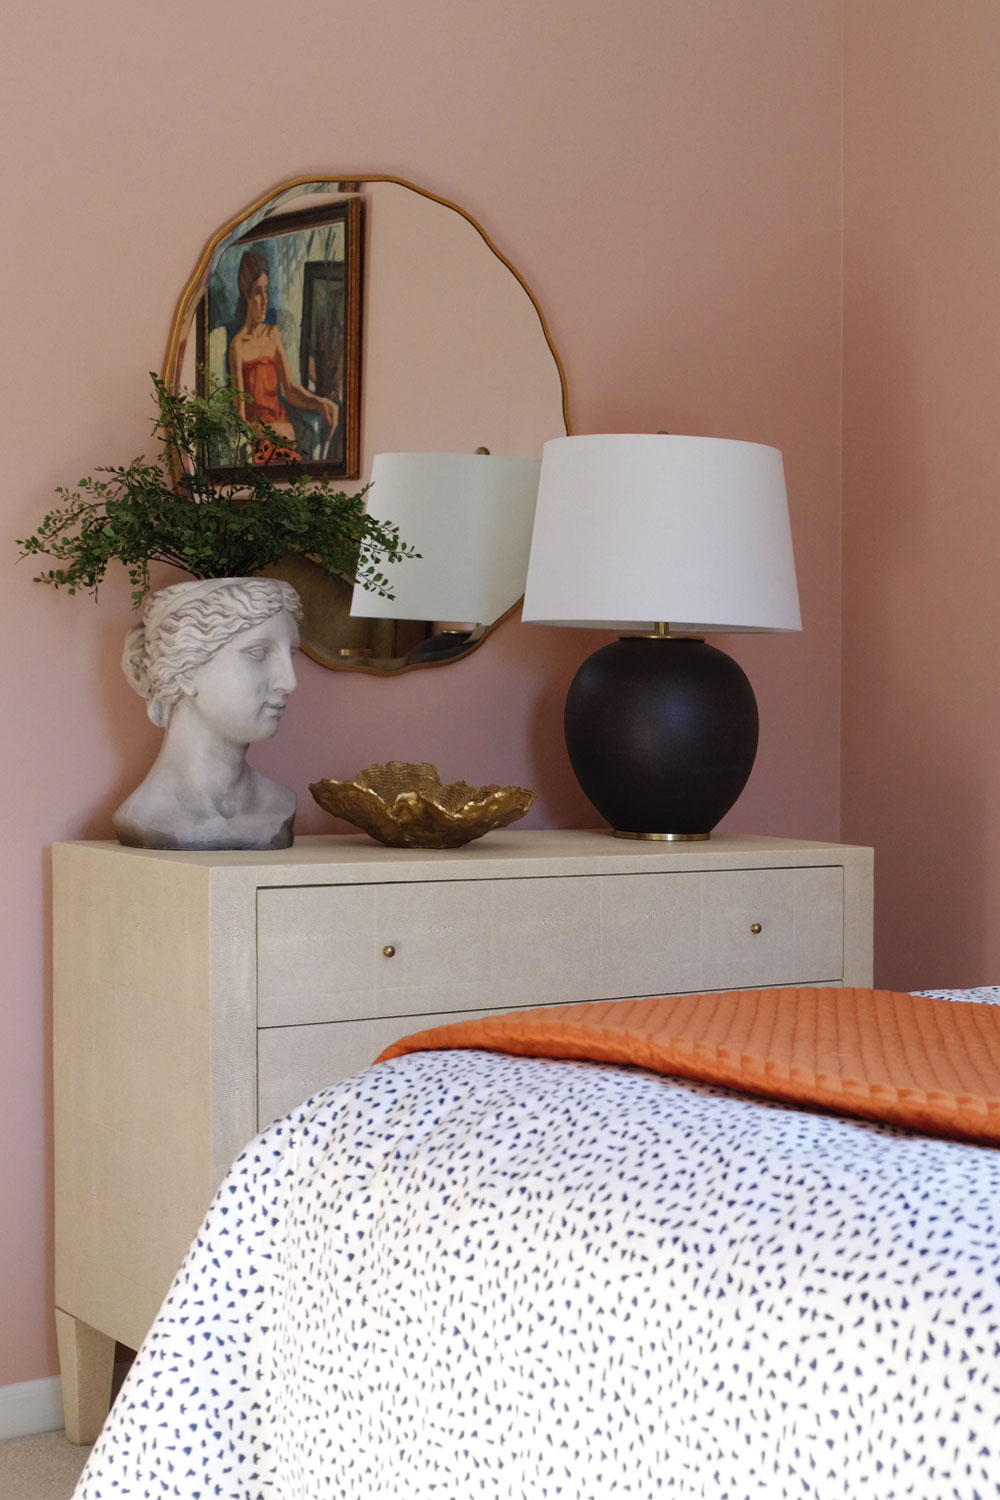 Bedroom lighting ideas. Find new bedroom light fixtures. Rounding up ceiling lights, table lamps, and floor lamps for a new guest bedroom makeover.